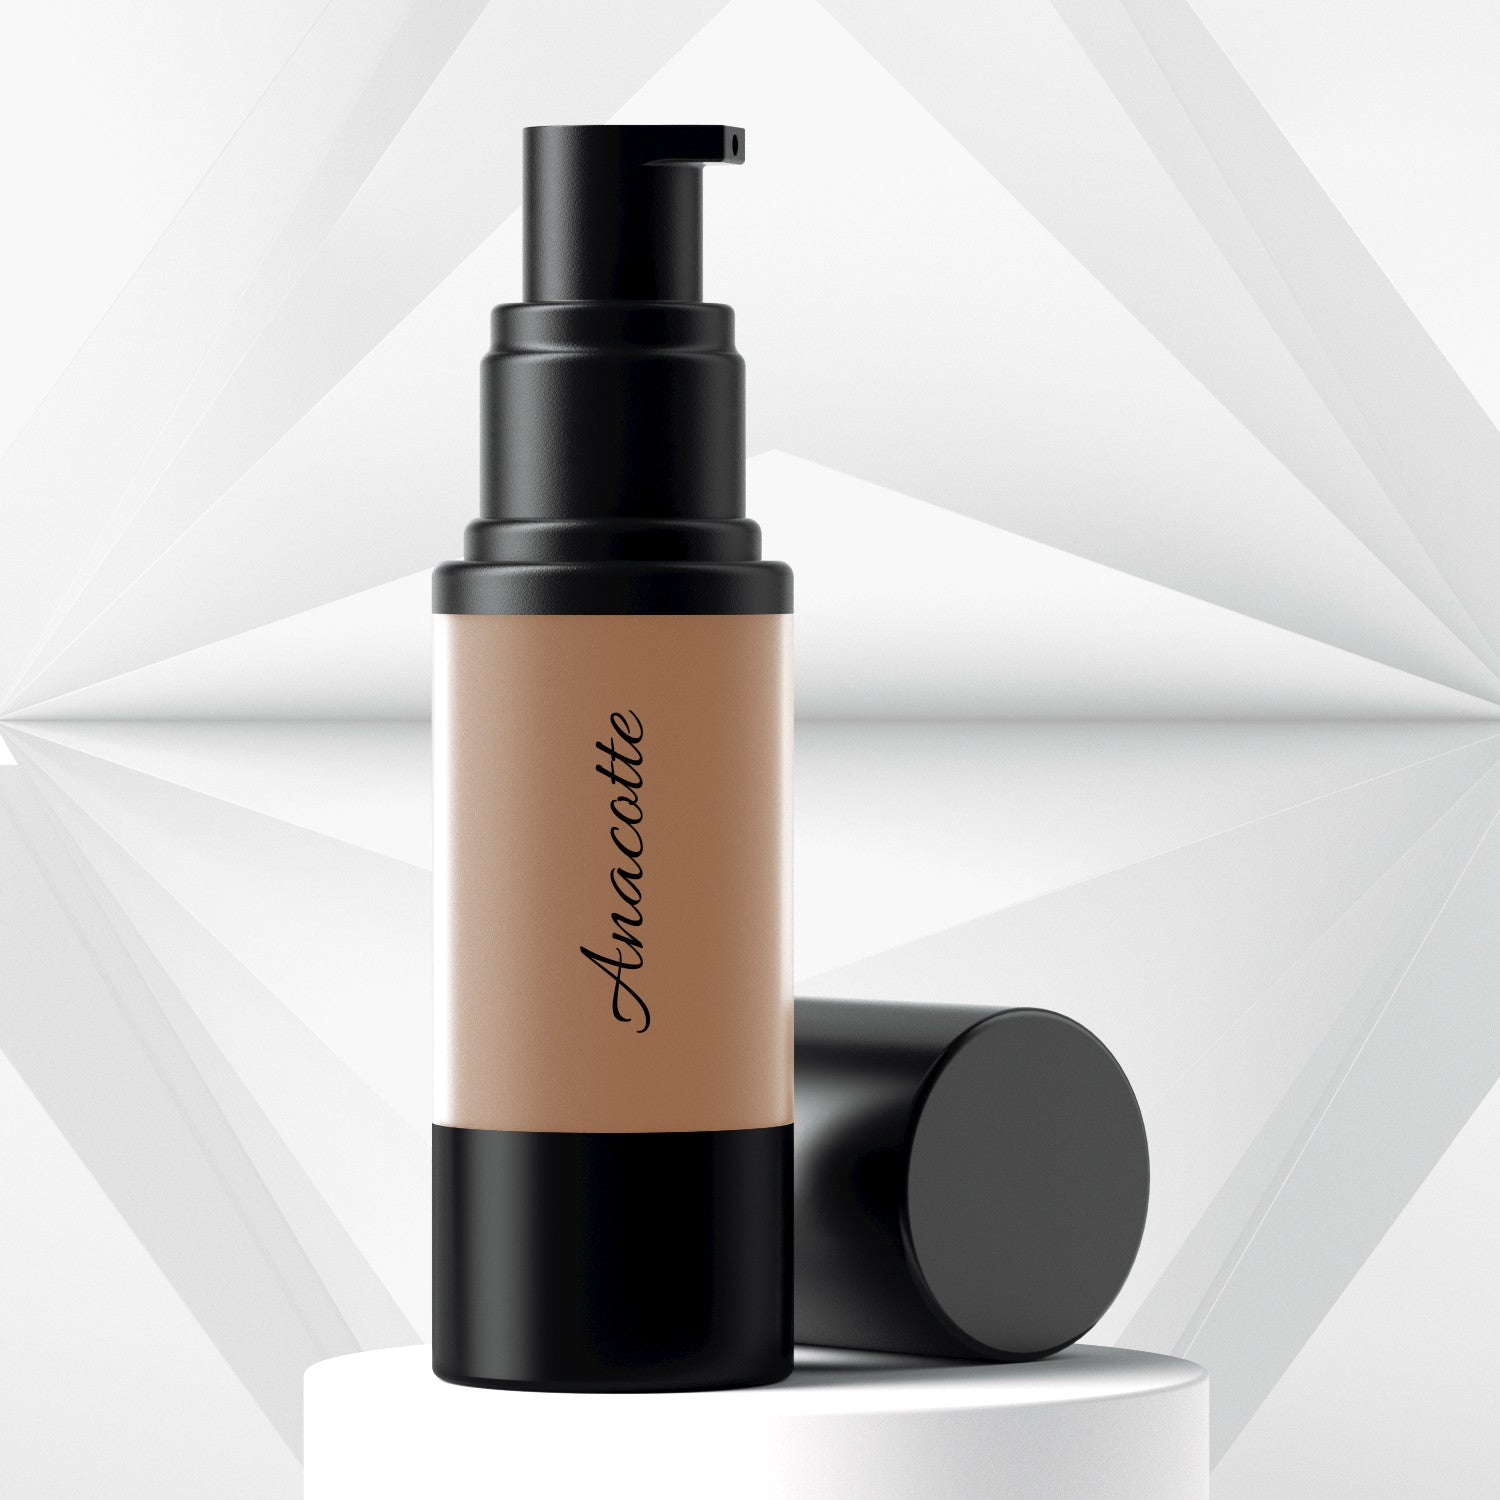 Anacotte Anti-aging Oil-Free Foundation Makeup coffee